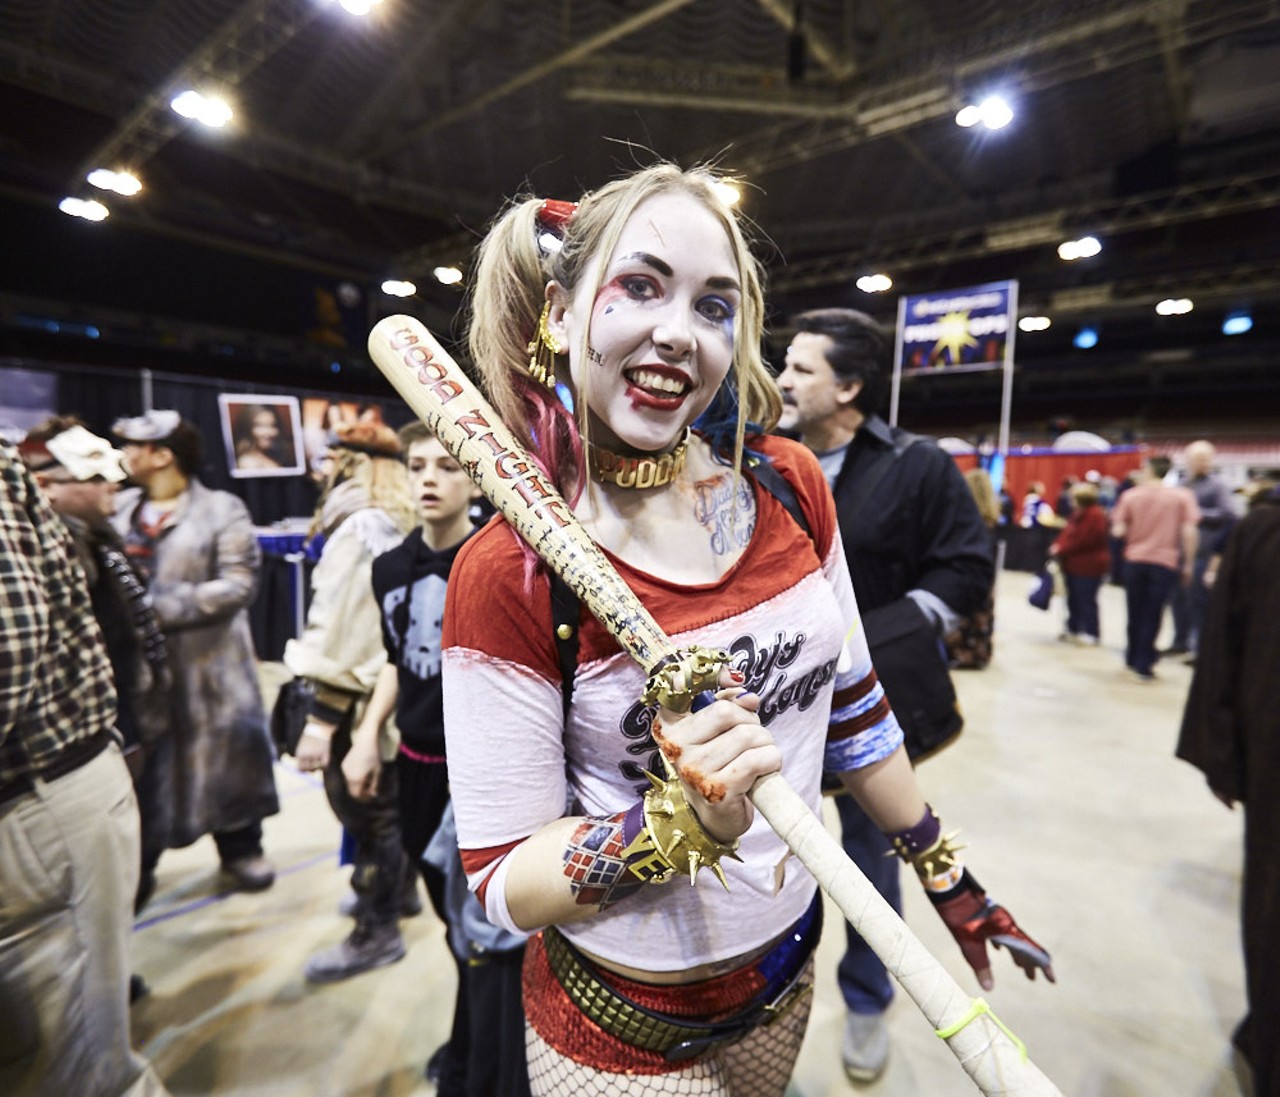 Wizard World 2018 at America's Center in downtown St. Louis.